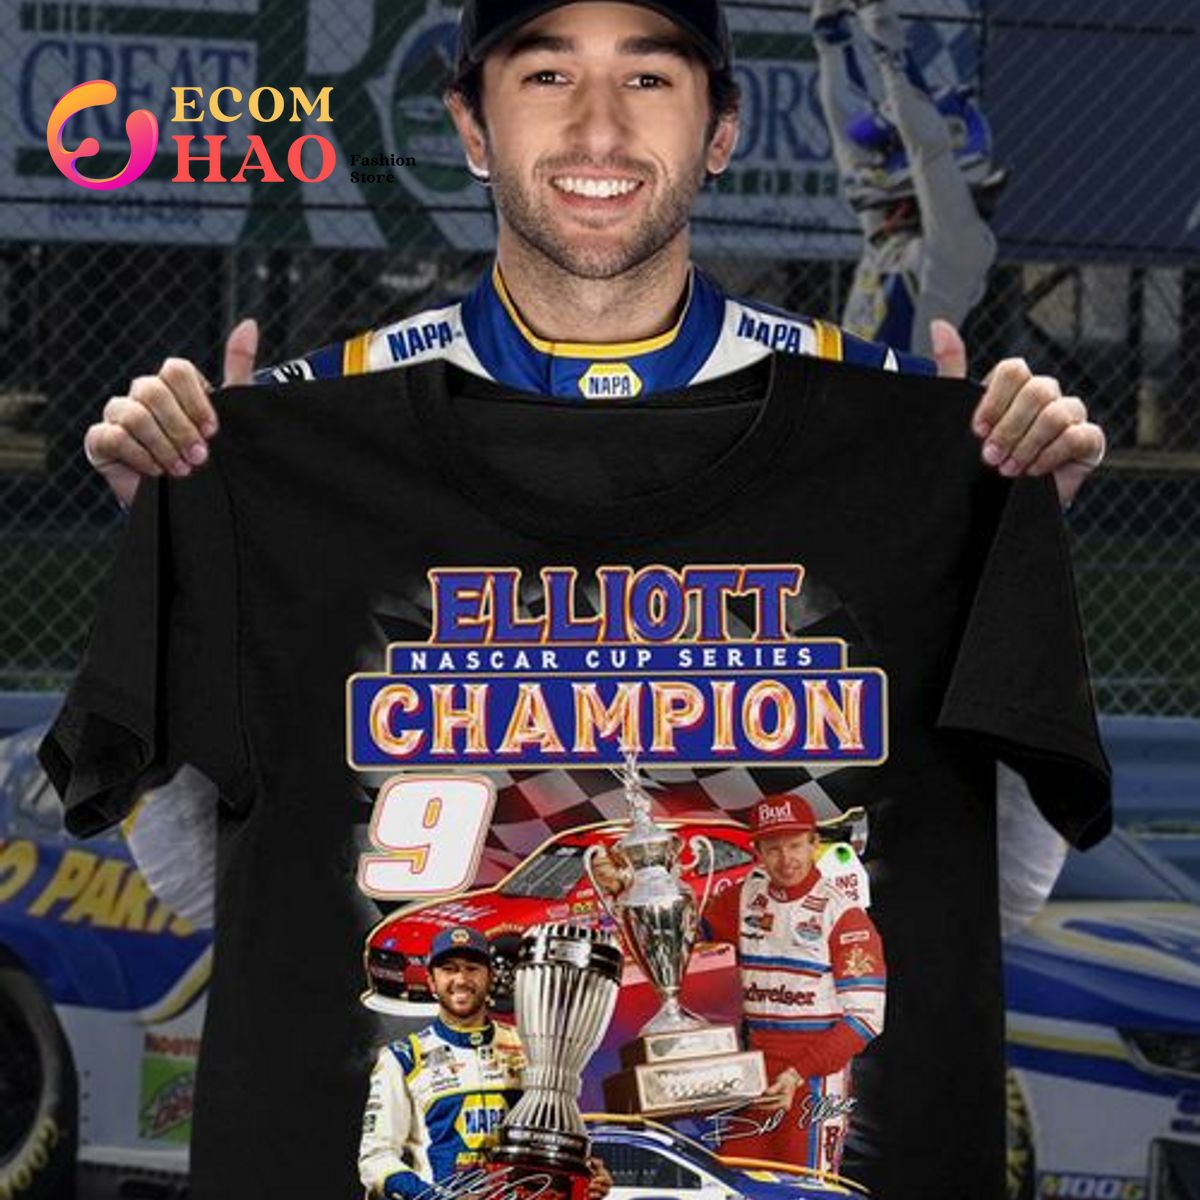 2022 NASCAR Cup Series Past Champions T-shirt